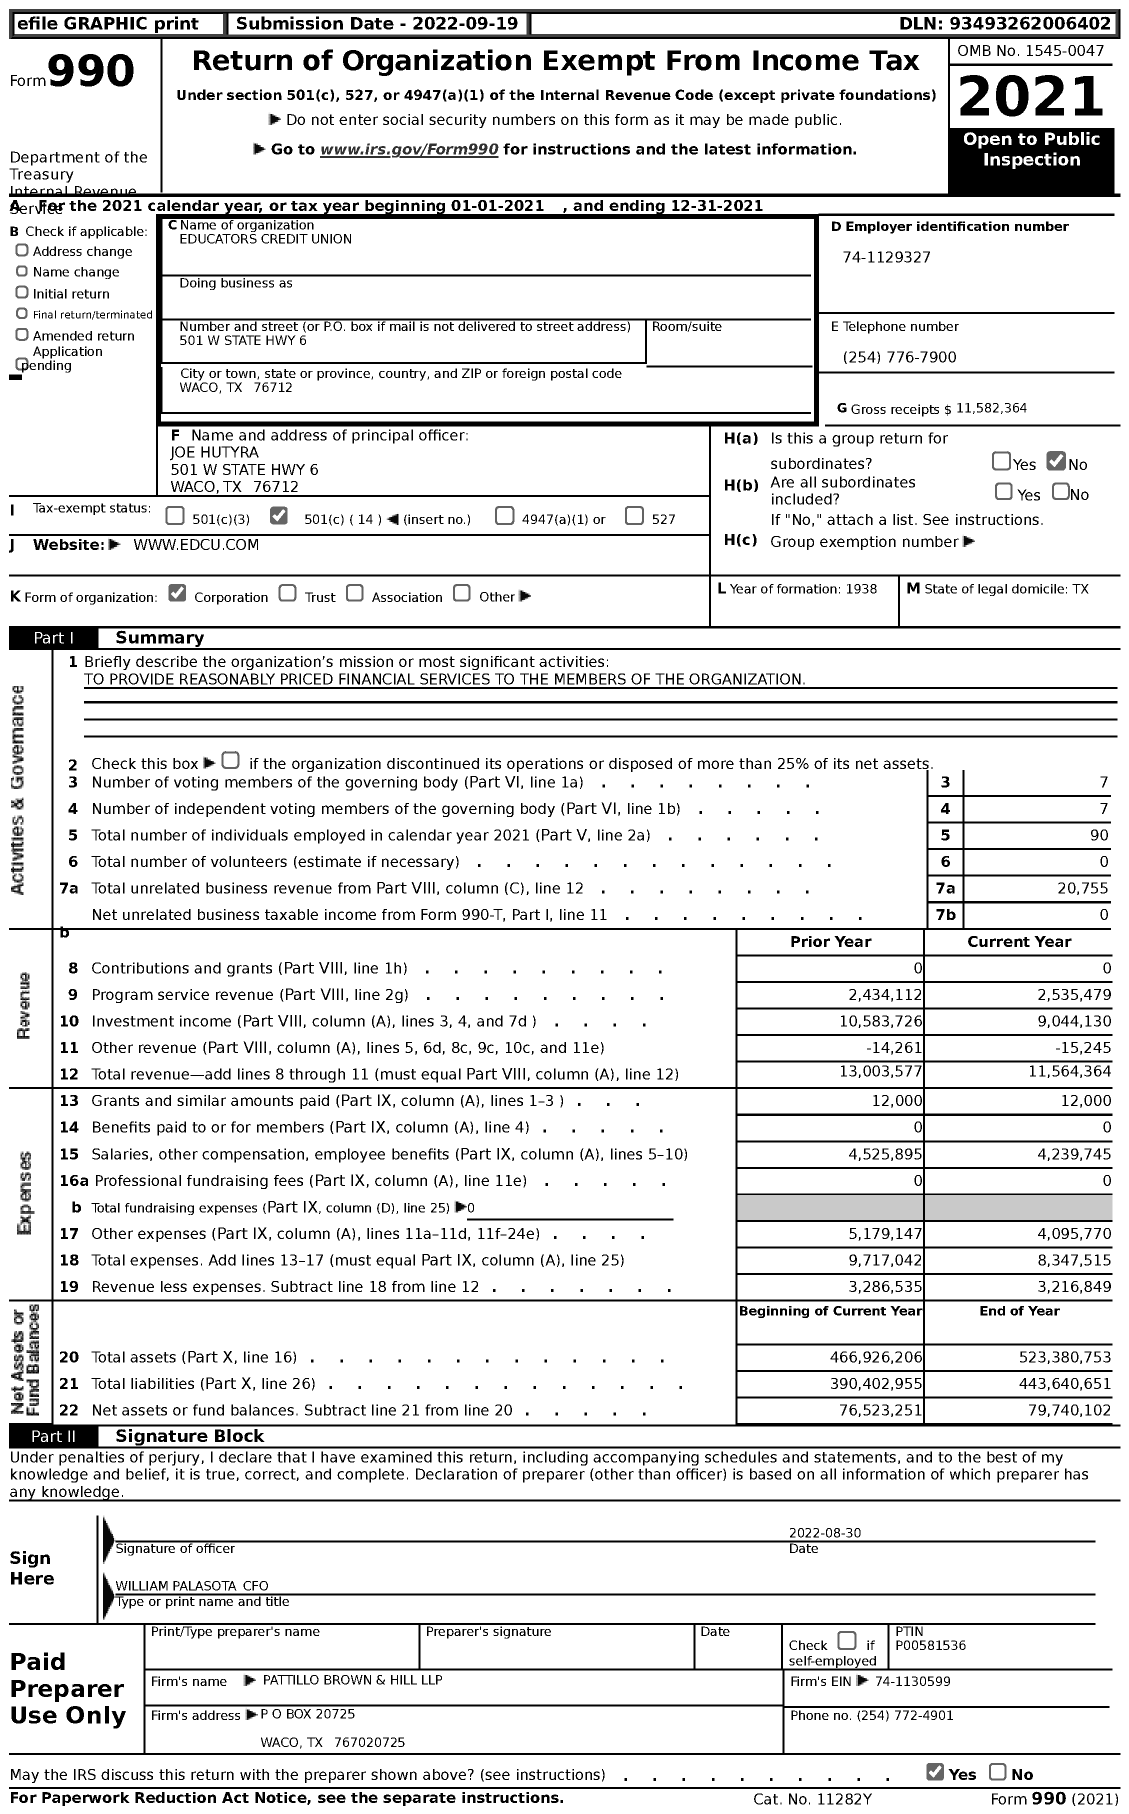 Image of first page of 2021 Form 990 for Educators Credit Union (ECU)